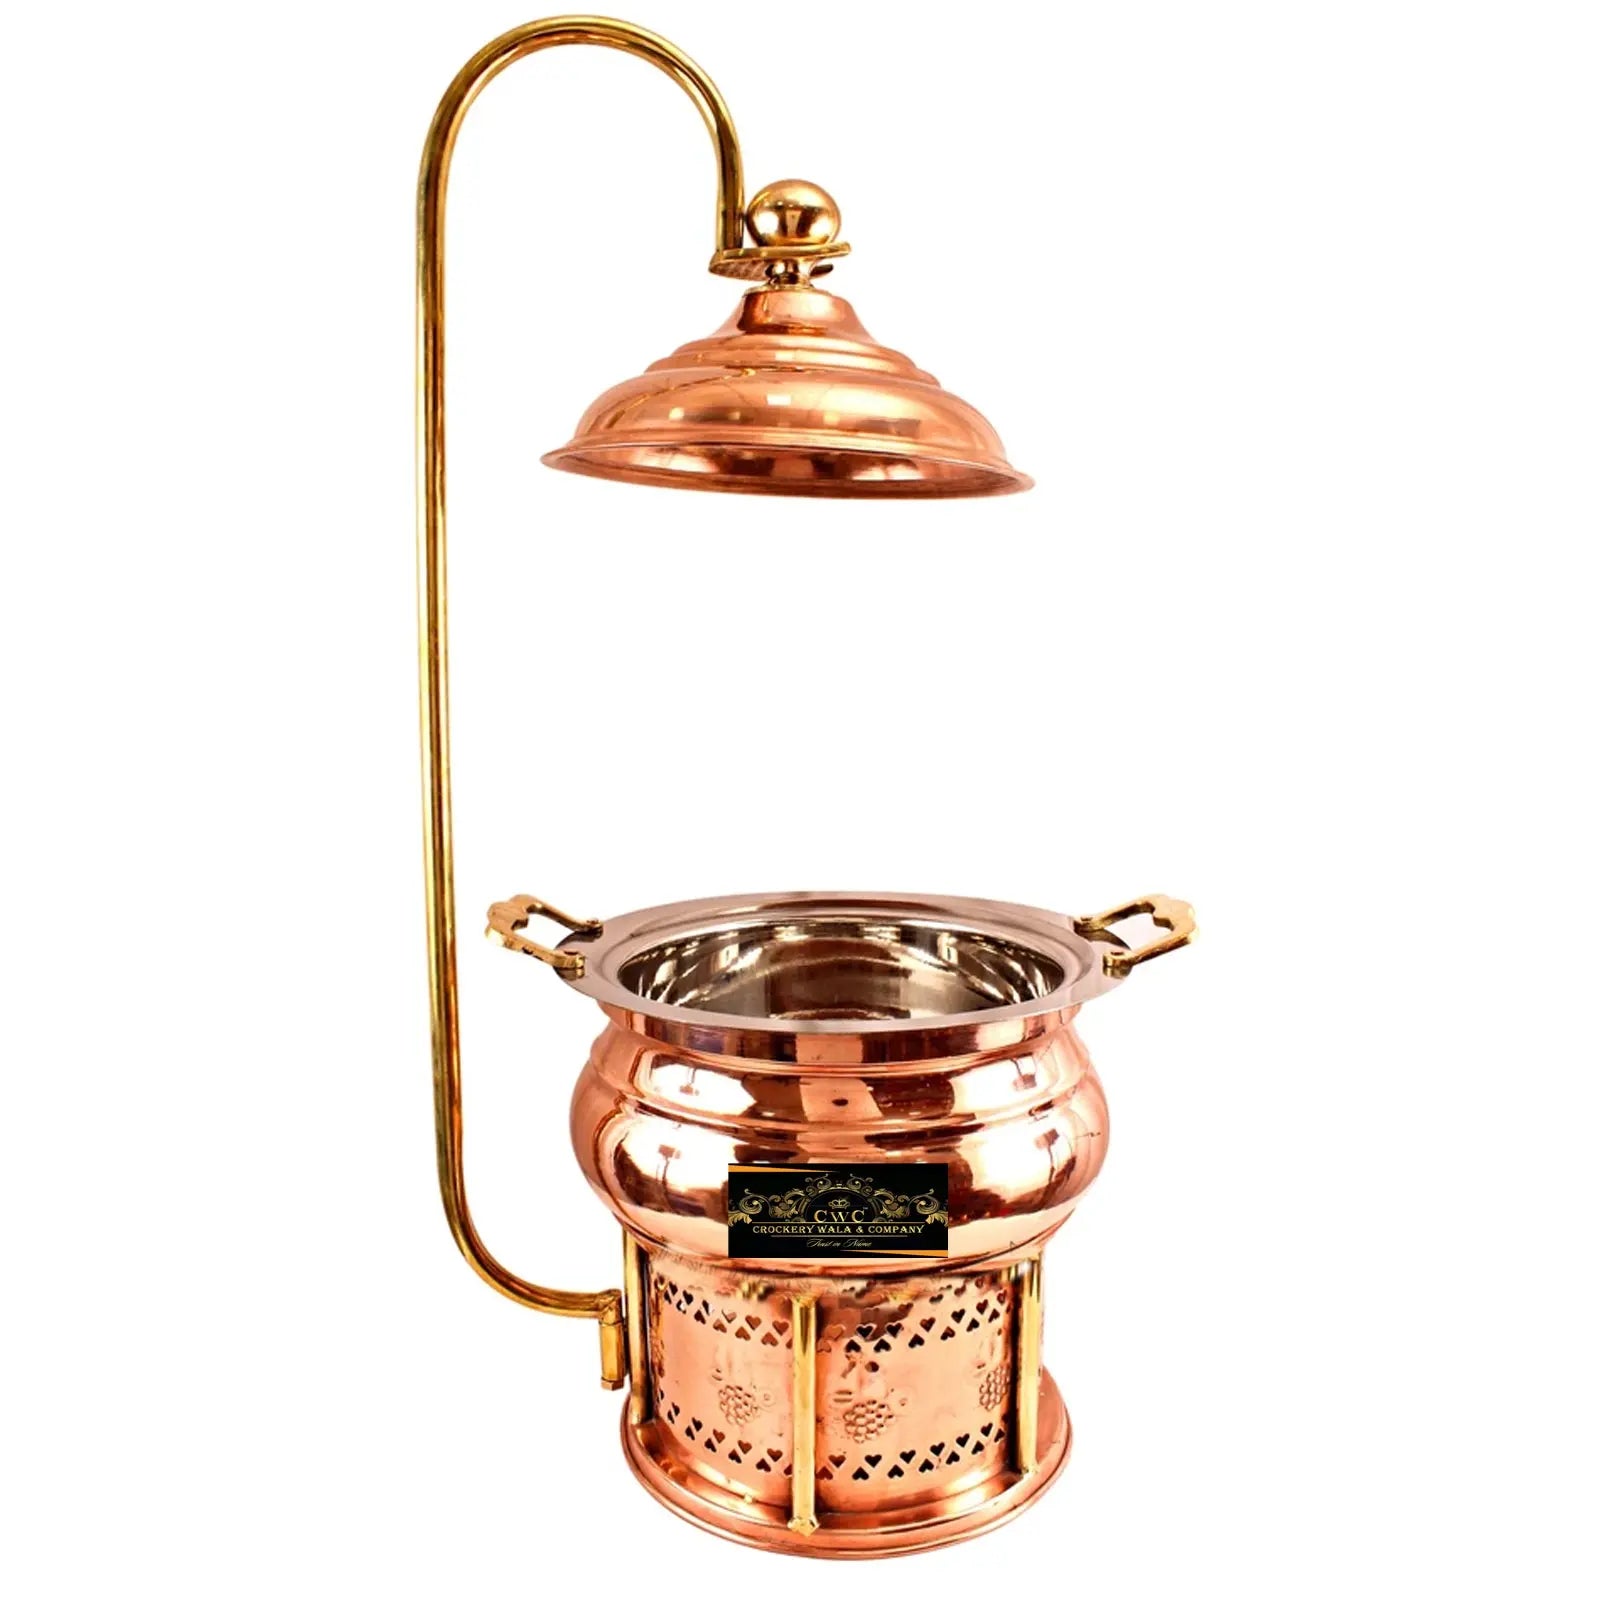 Crockery Wala And Company Copper Steel Chaffing Dish With Stand Plain Solid Design 4 Liters - CROCKERY WALA AND COMPANY 